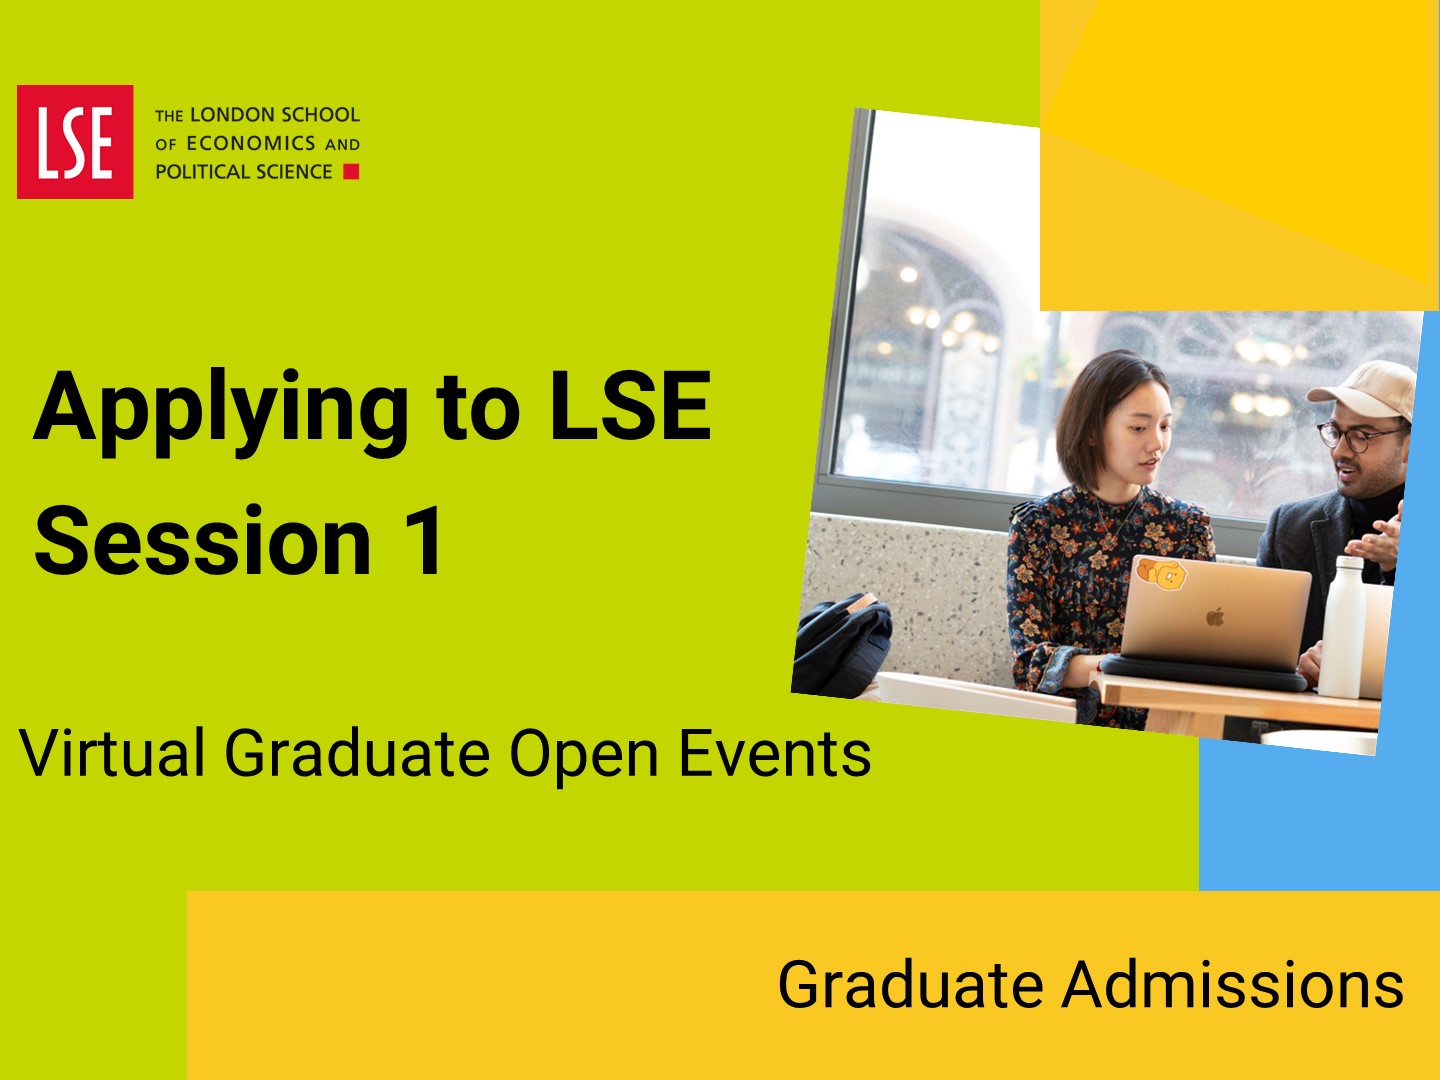 Applying to LSE for Graduate Study Session 1